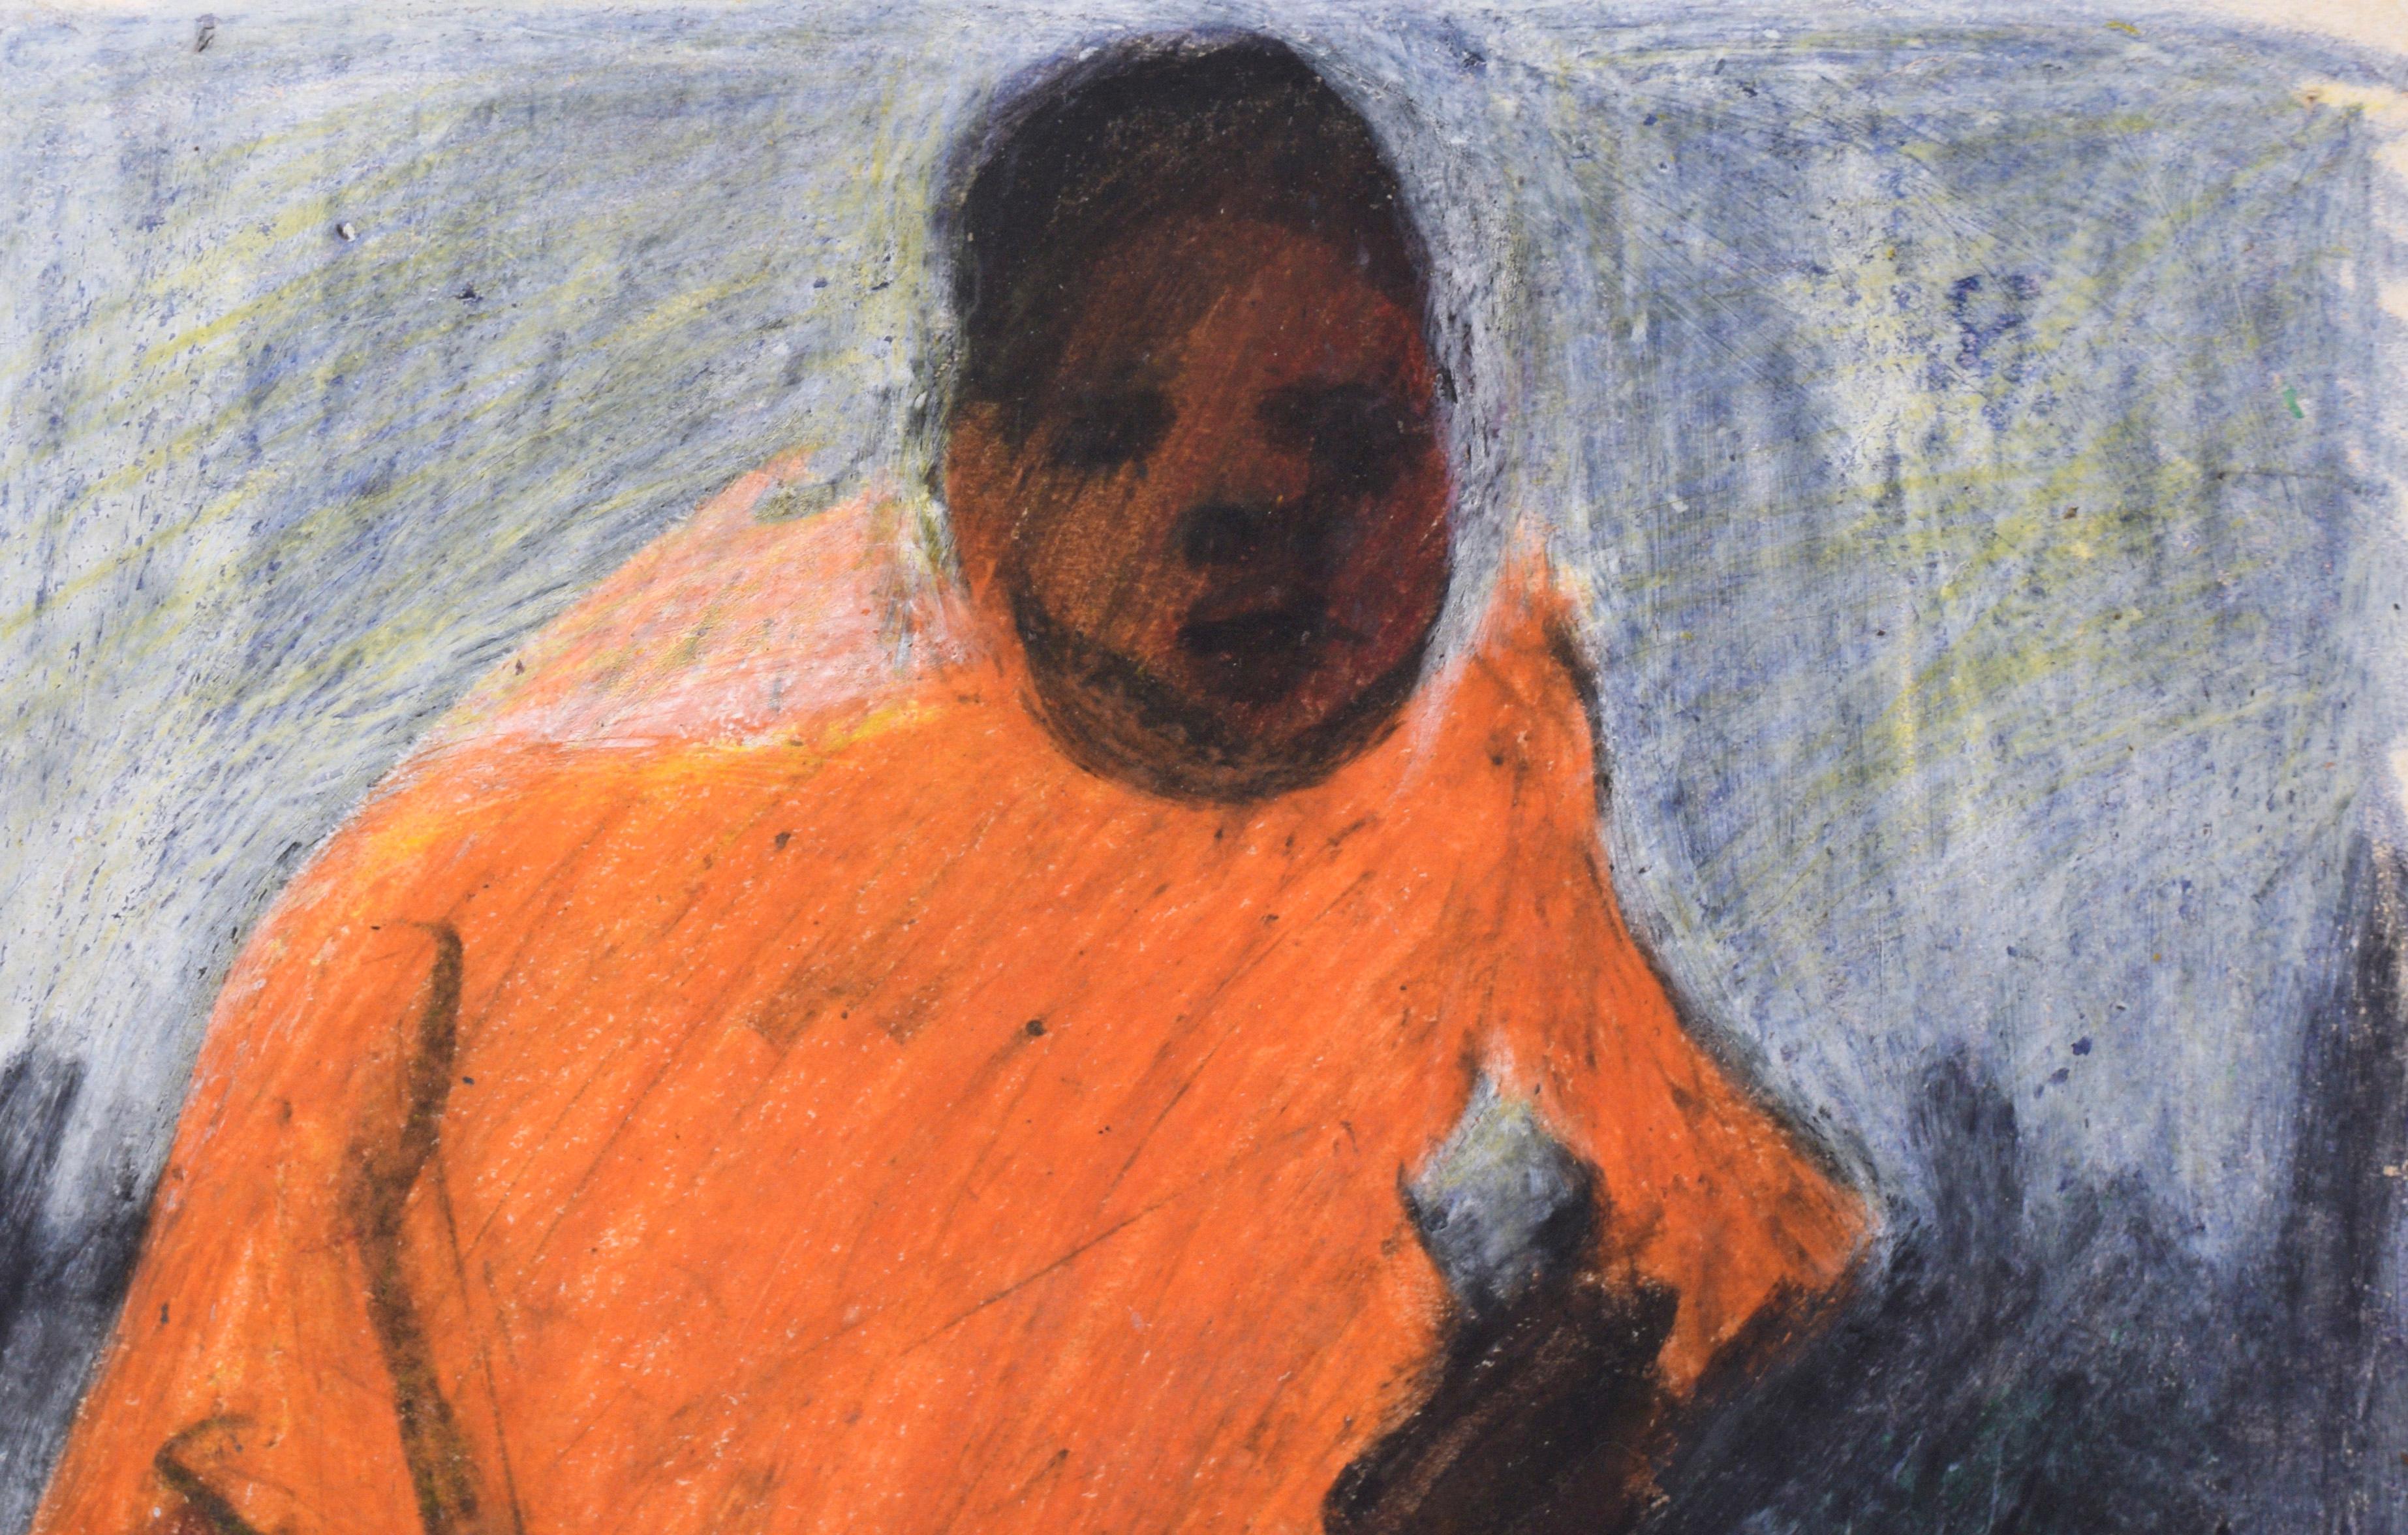 Track Star - Abstracted Portrait of an African American Man in Pastel on Paper

Bold and imaginative pastel drawing of a man in a track suit by an unknown artist (20th Century). An African American man stands on a running track, wearing an orange